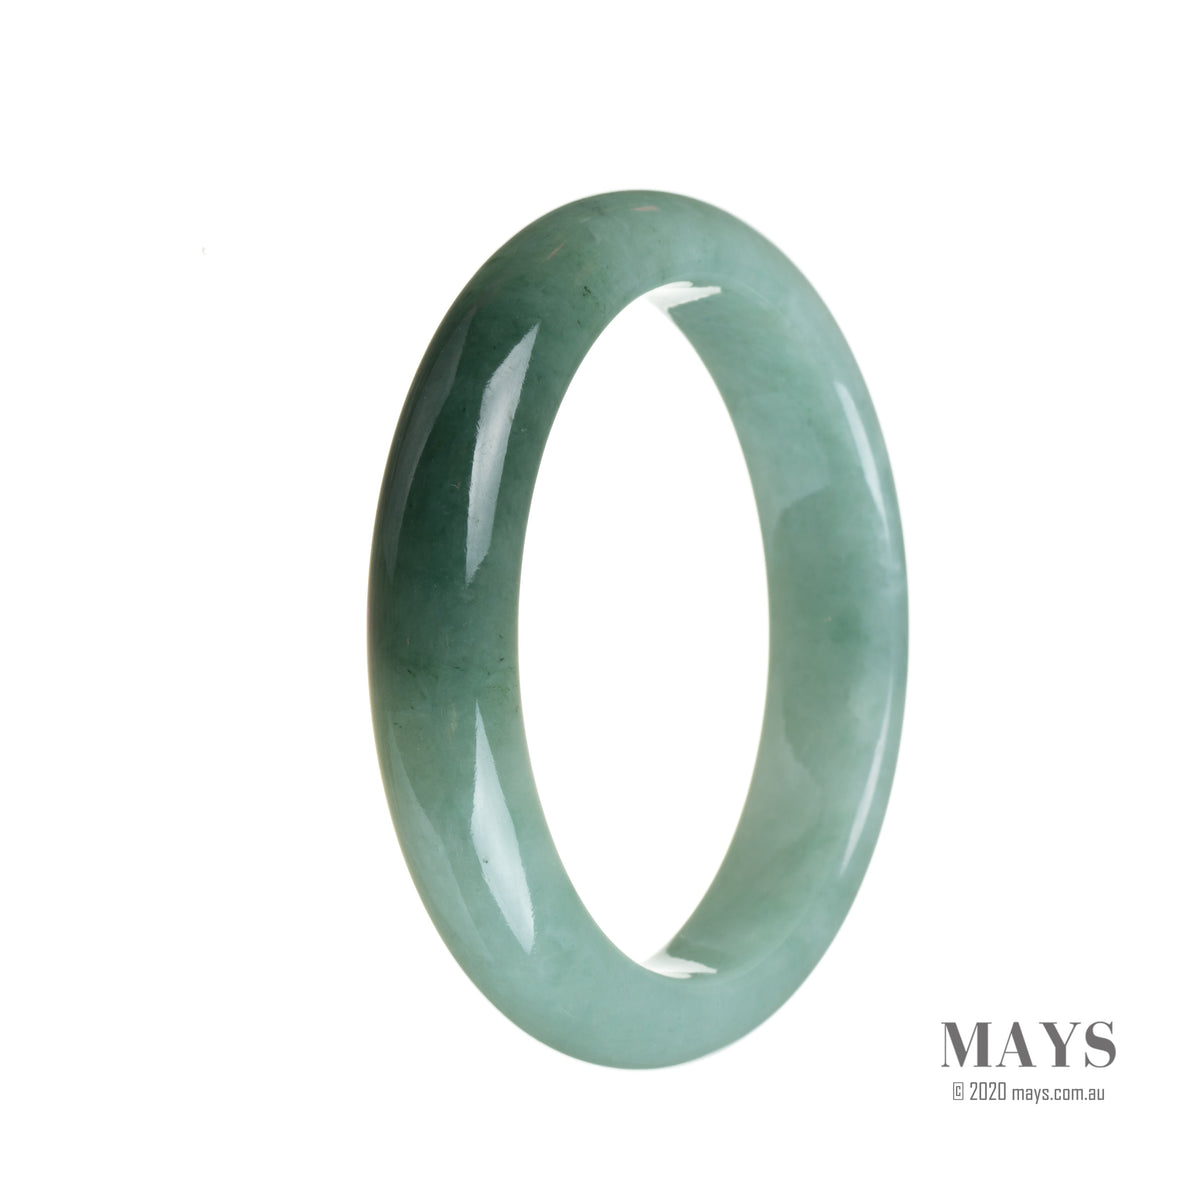 A close-up image of a jade bangle bracelet made from real grade A green and dark green jadeite. The bracelet has a 57mm diameter and features a half moon shape. This beautiful piece of jewelry is from the MAYS™ collection.